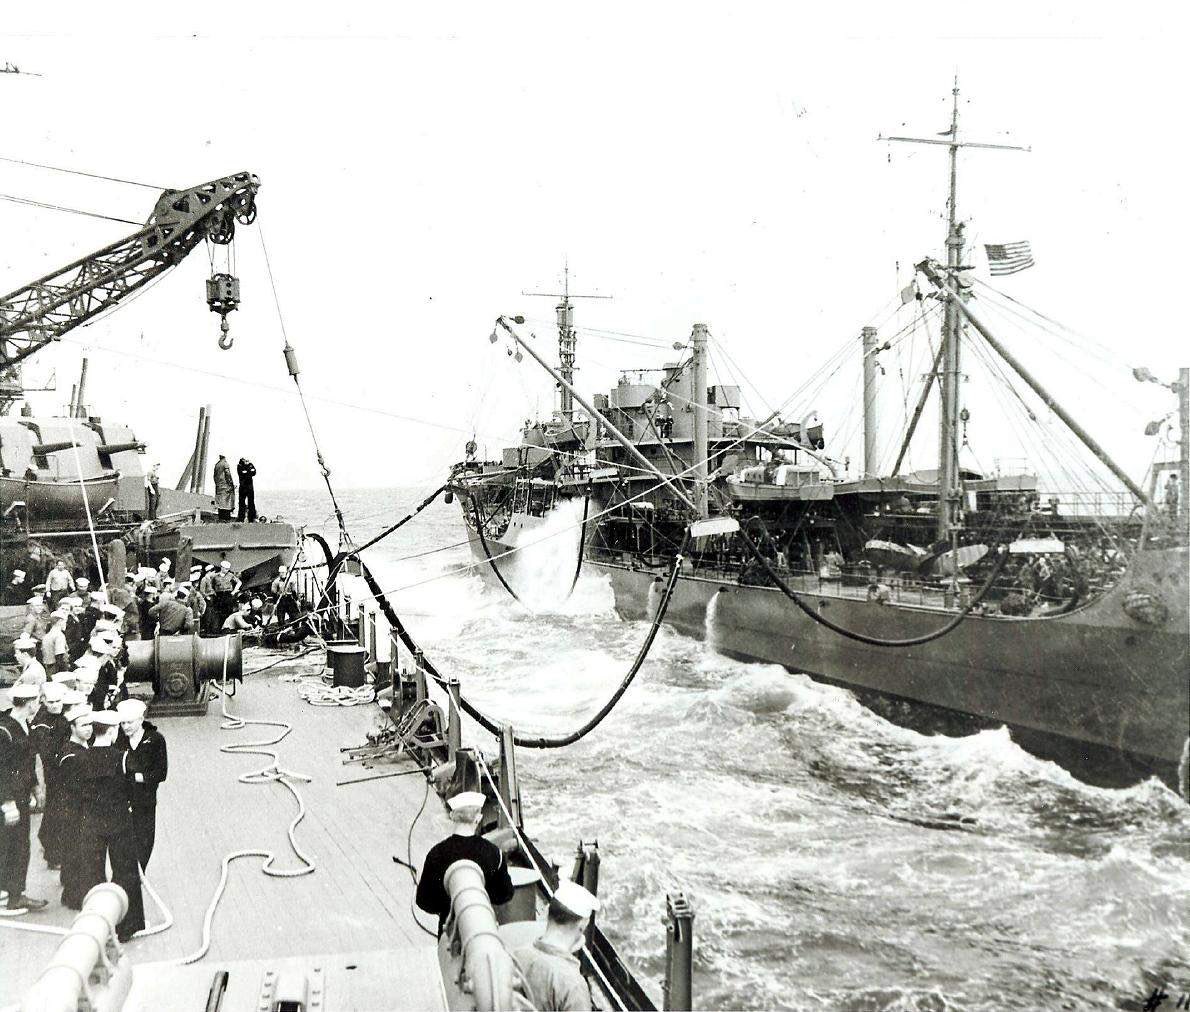 2 photos of USS Washington (BB 56) refueling at sea. Navsource states the tanker is USS Salamonie (AO 26) and the date as September 1, 1942. I believe this to be incorrect for a few reasons. 1. Salamonie was in Hampton Roads on 9/1 and didn’t enter the Pacific until mid 1944